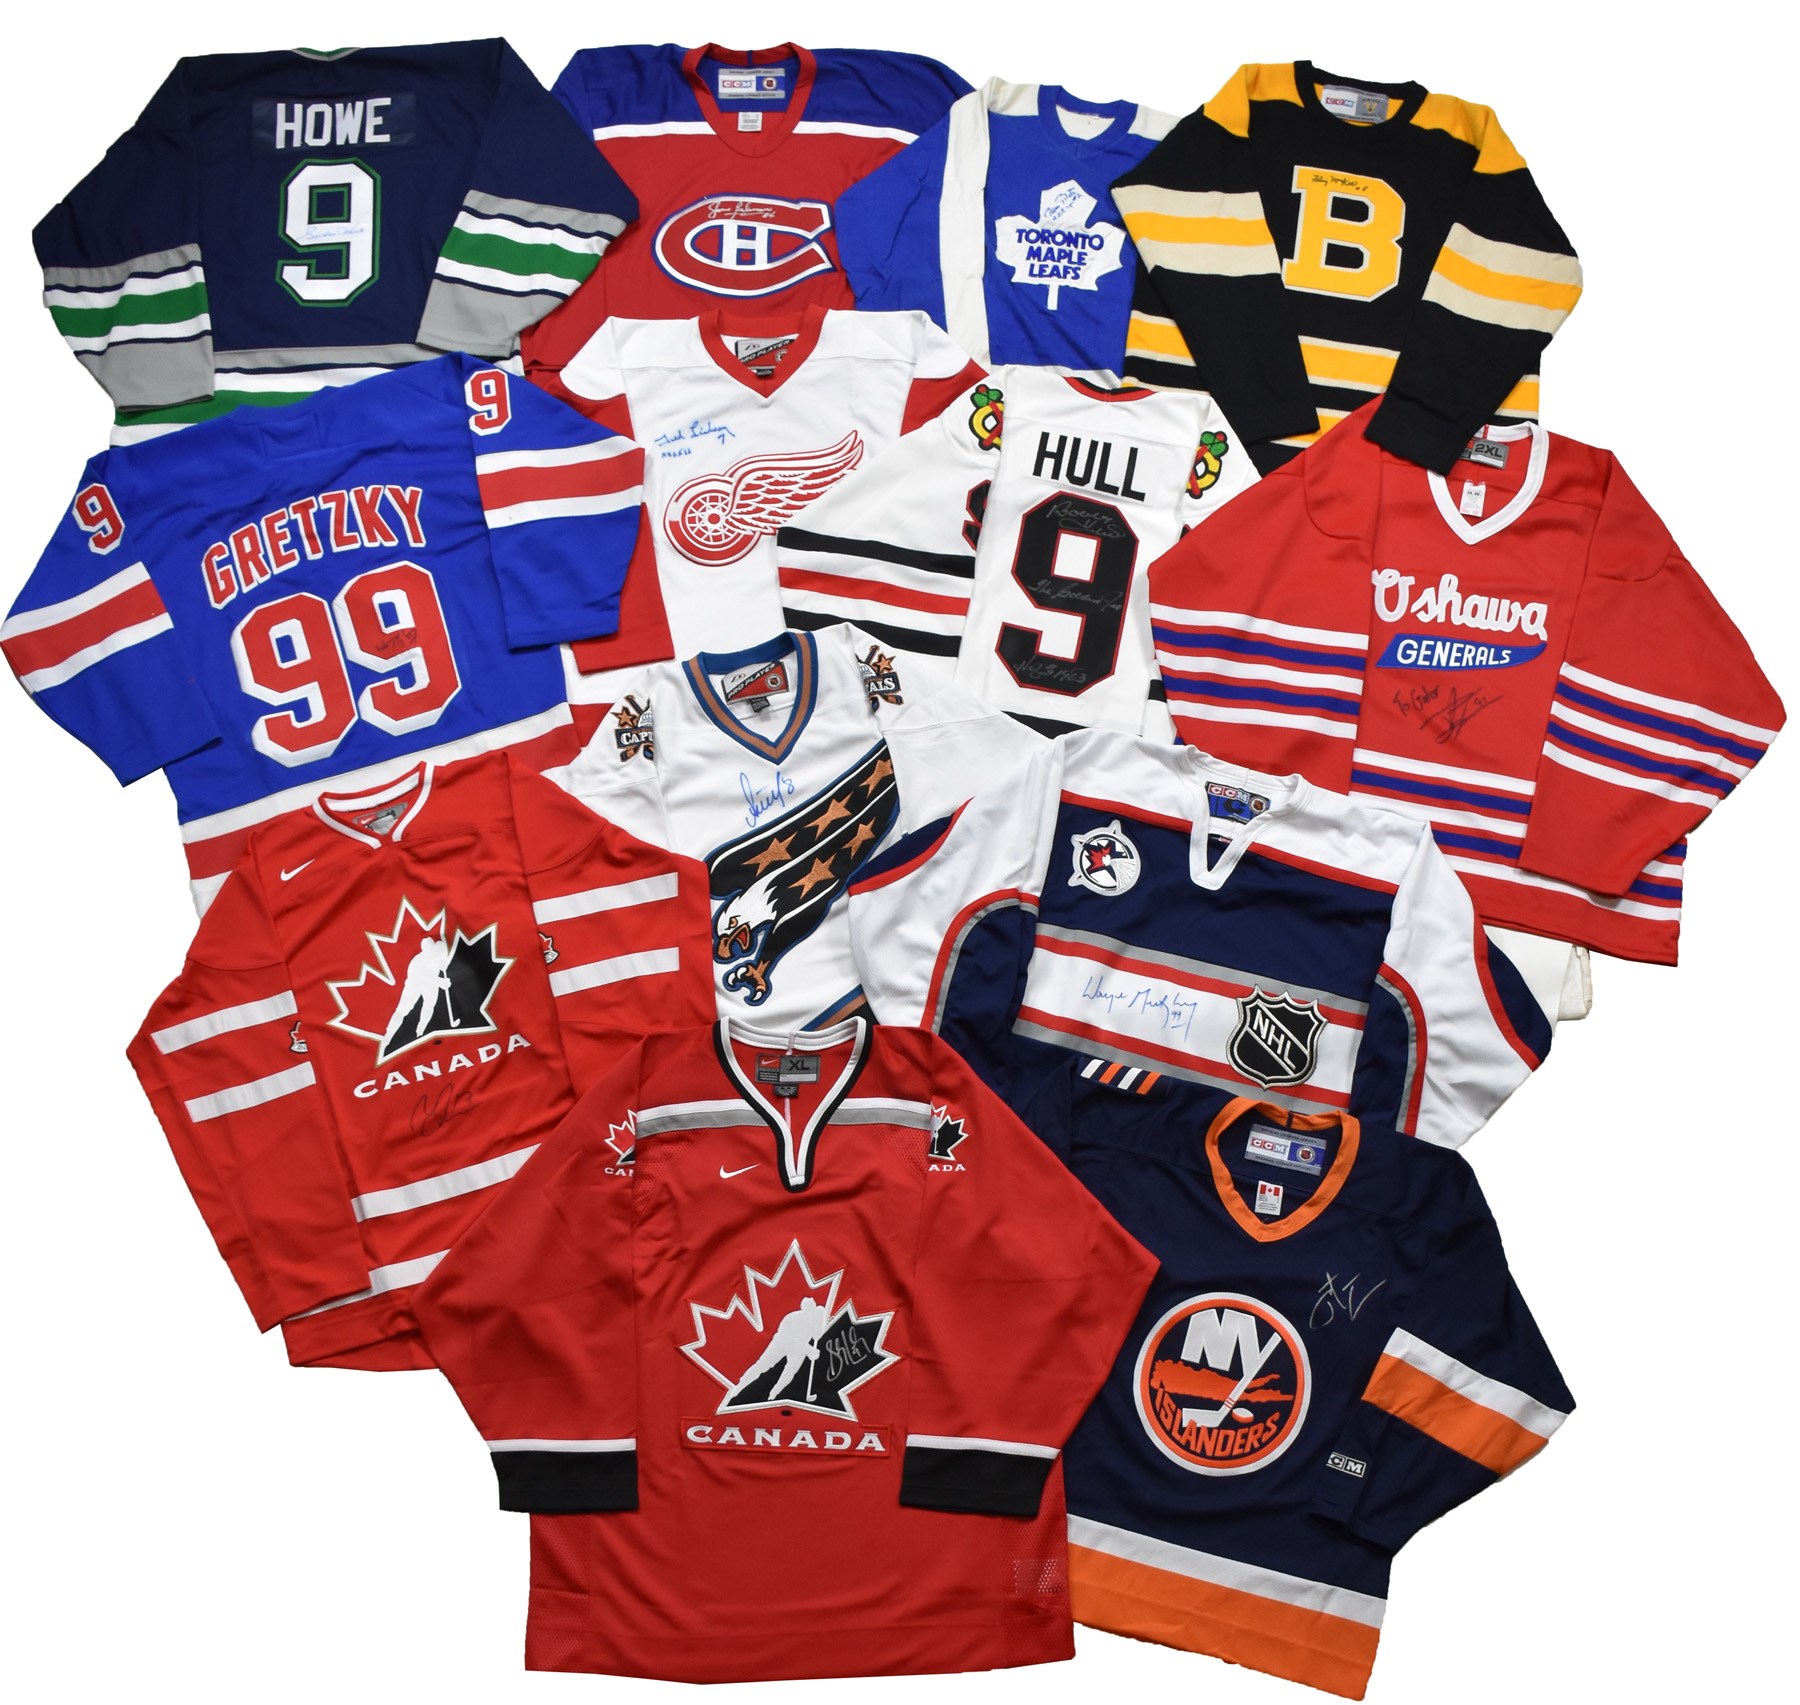 Enormous Hockey Signed Jersey Collection with All-Time Legends - Gretzky, Howe, Crosby, McDavid, Ovechkin, Beliveau (250+)